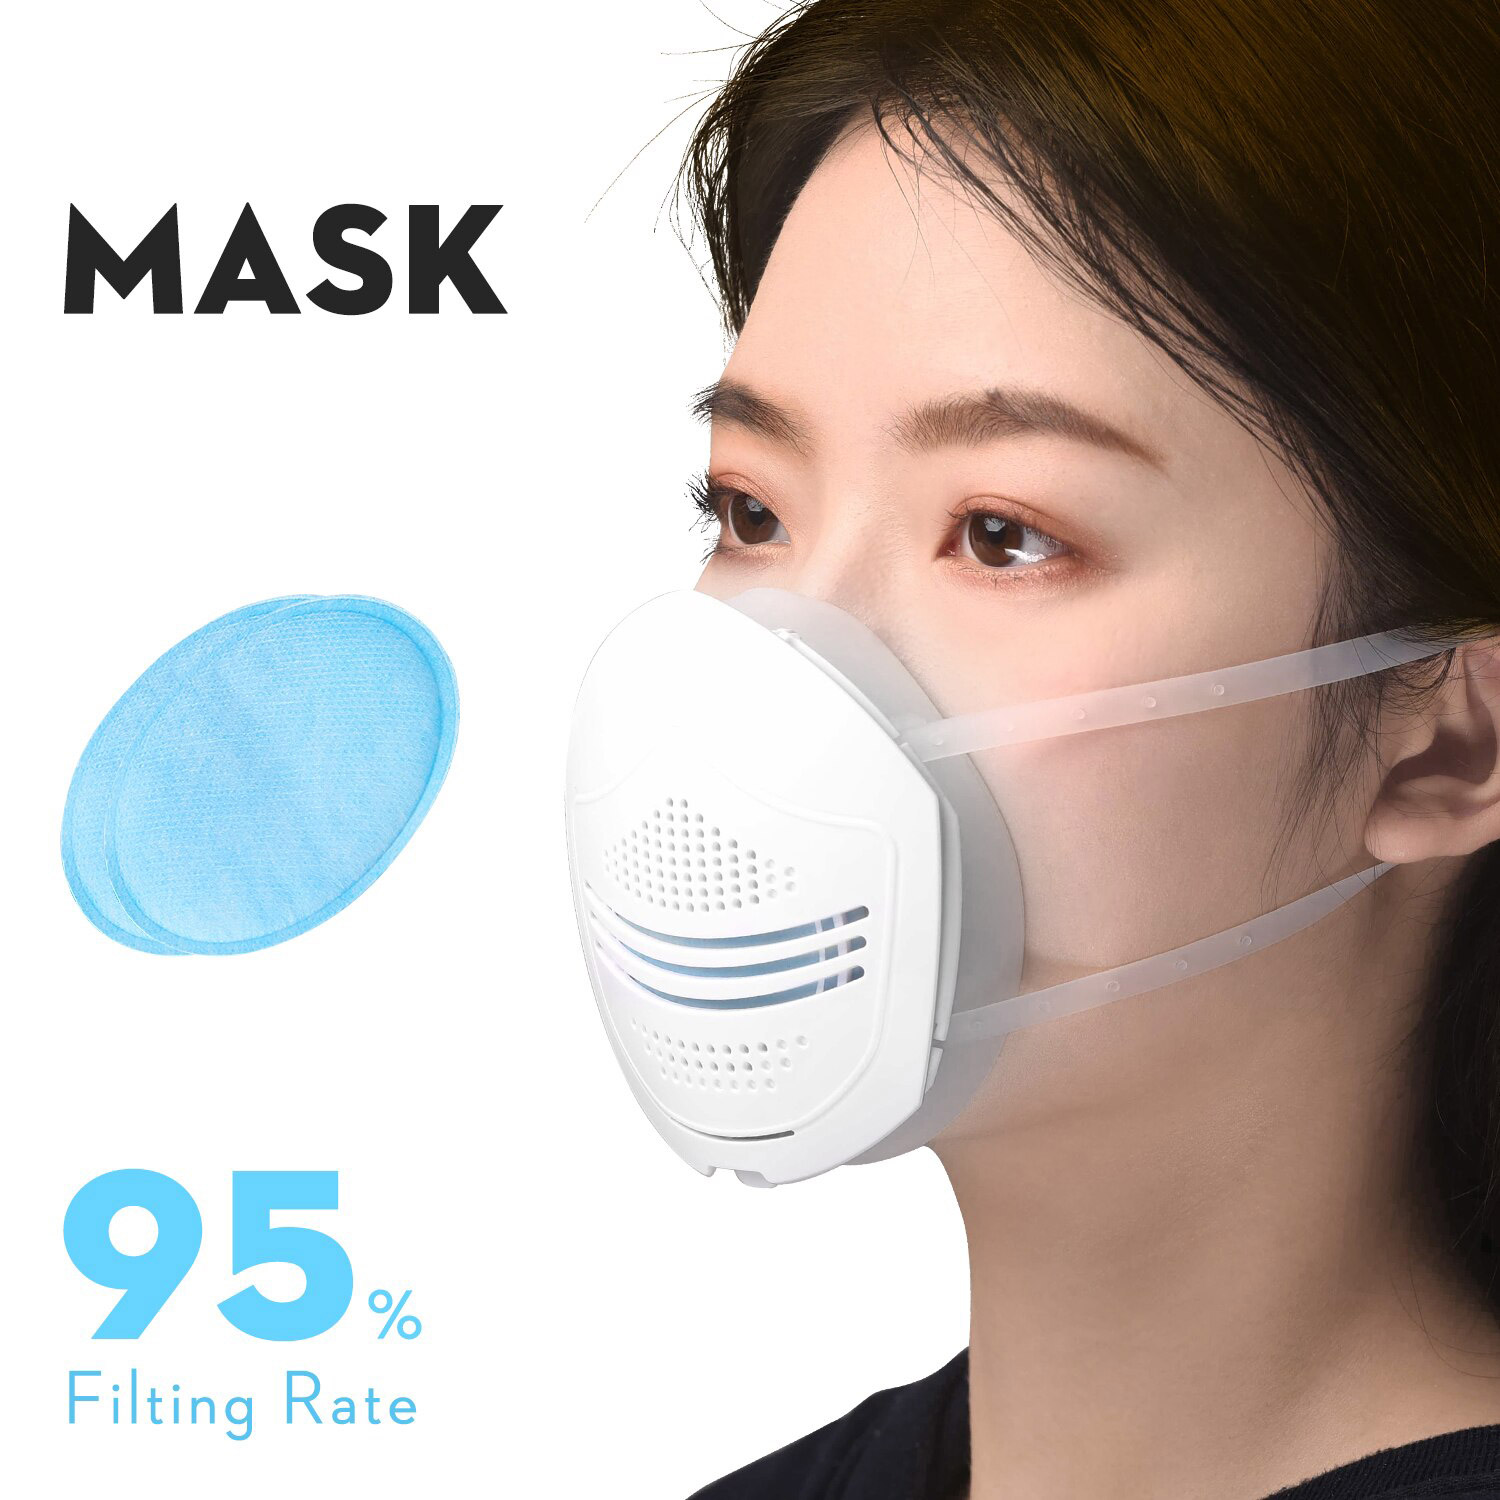 

10PCS Reusable Washable Multi-Function Air Filter Mask Filtration Efficiency 95% With 300pcs Replaceable Filter Element For Anti-Pollution Dust Allergy Haze - White